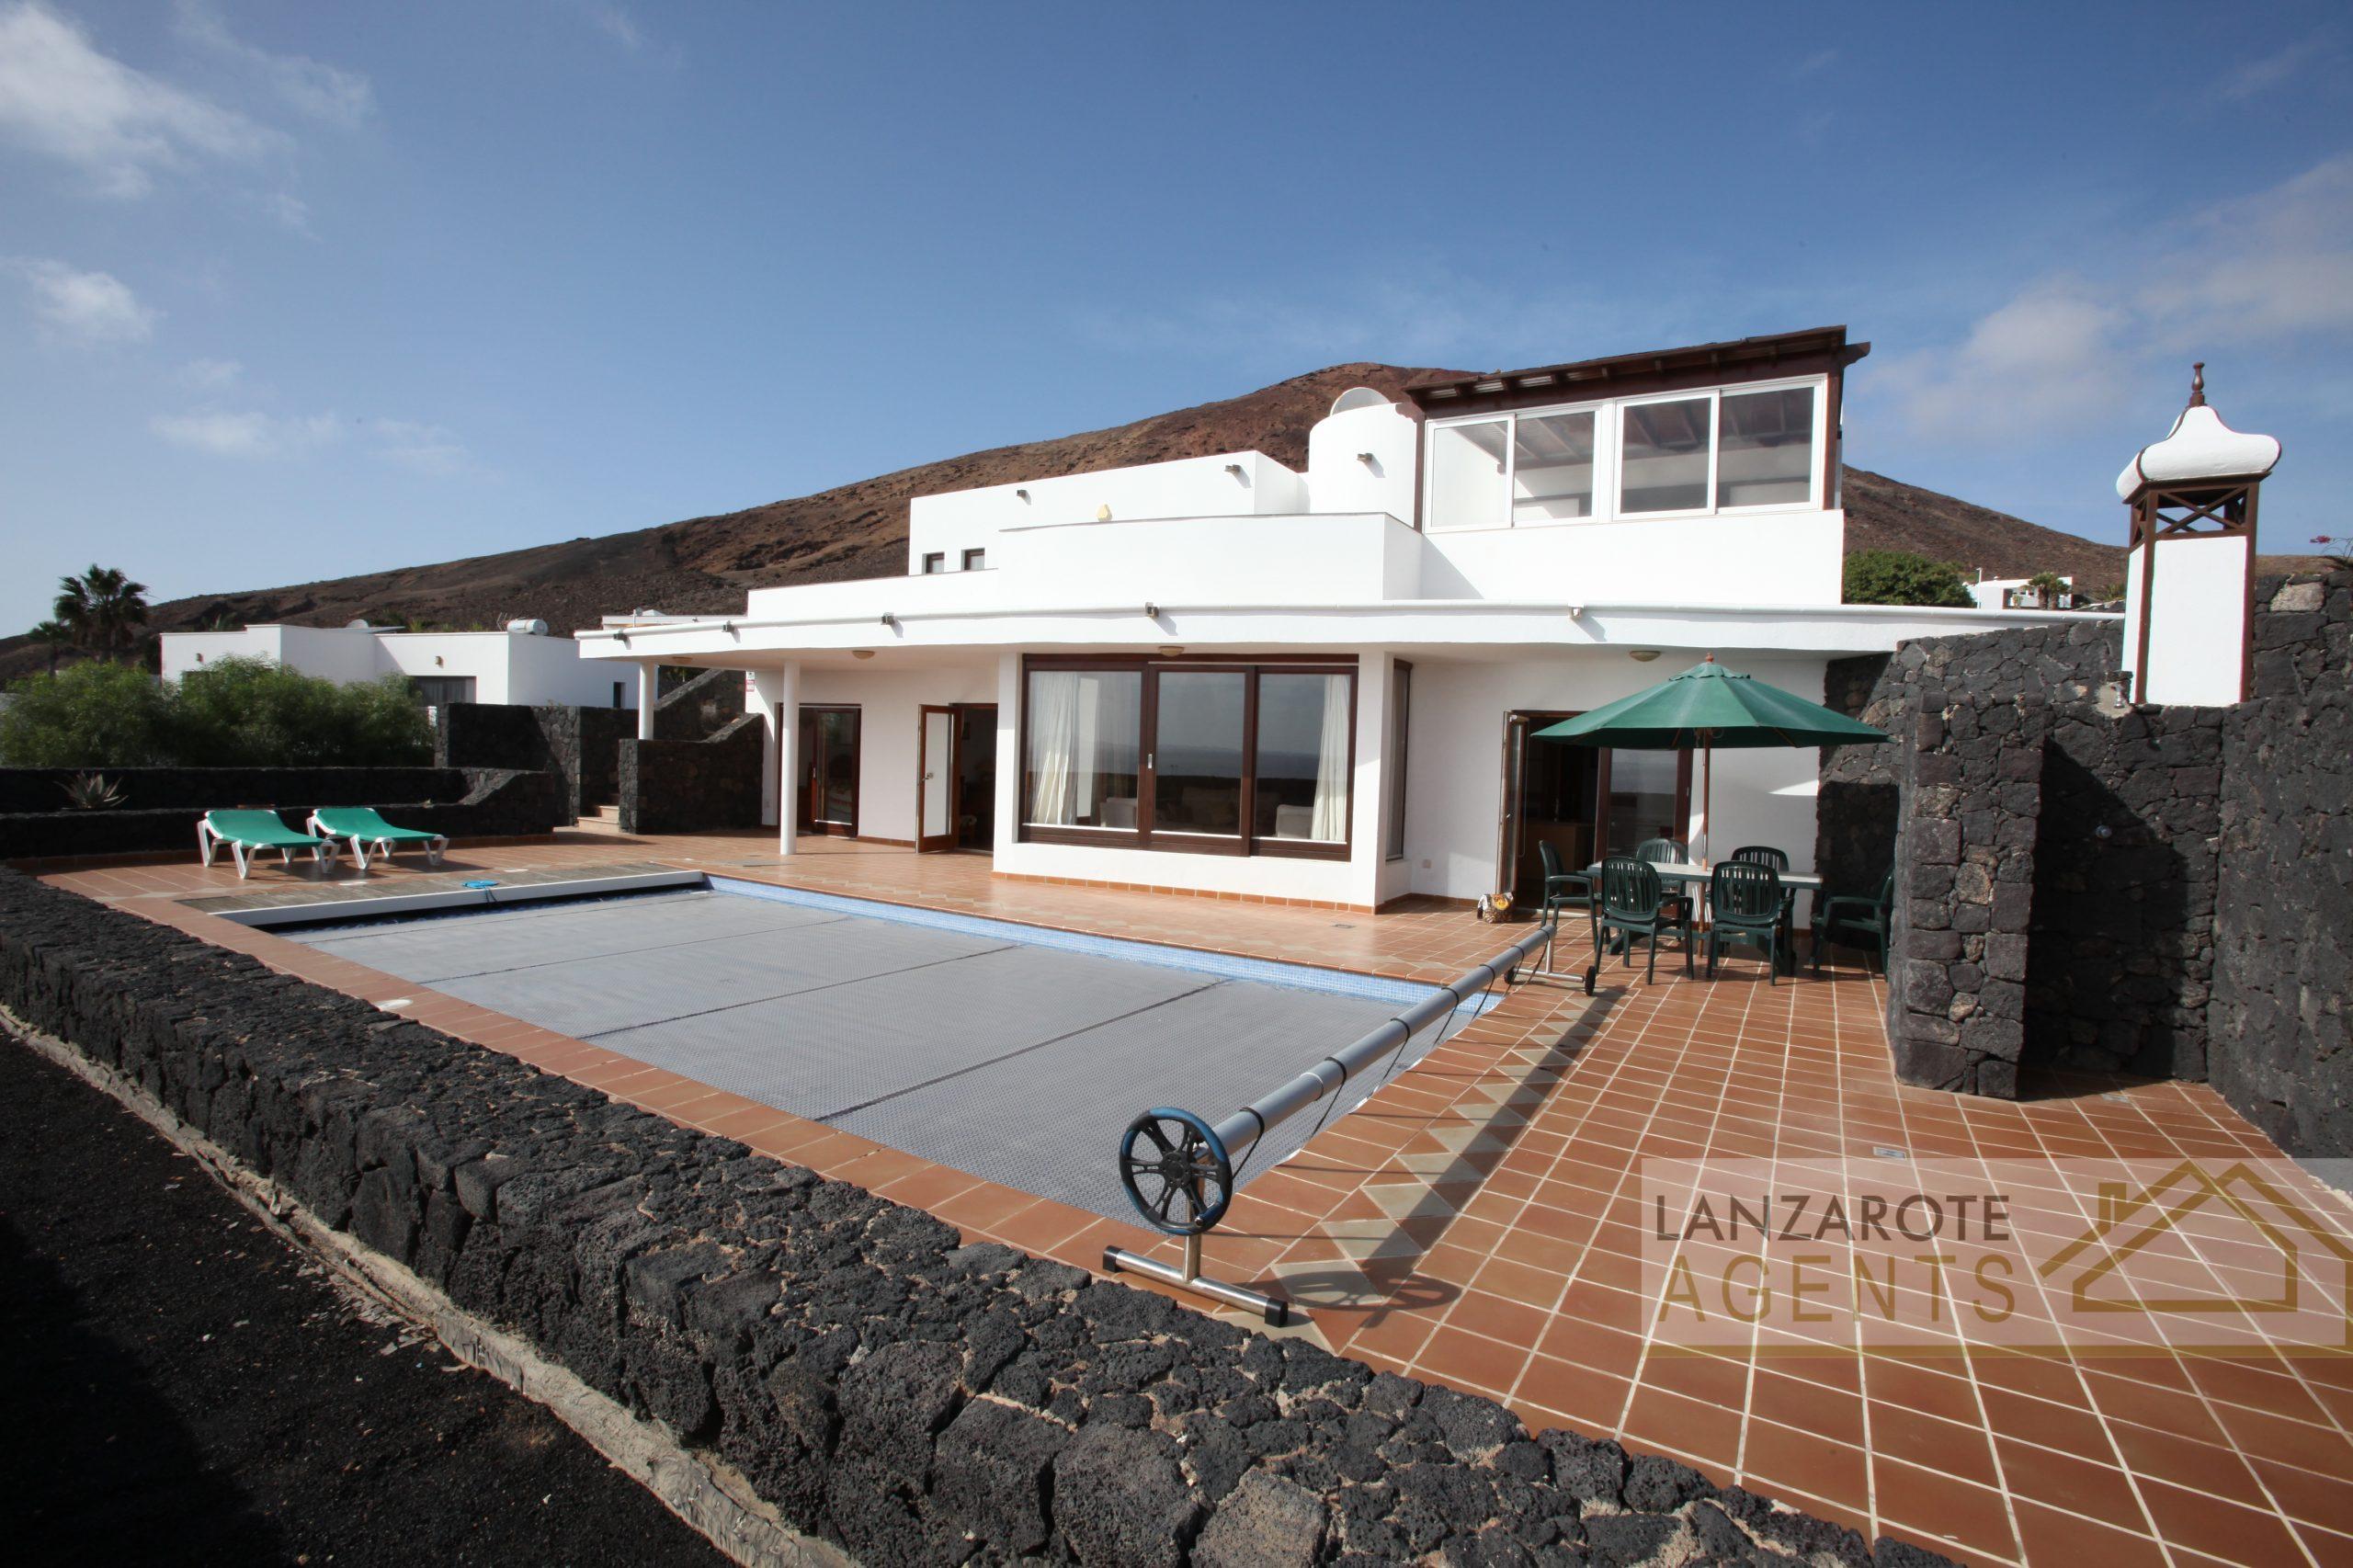 Fabulous Detached Villa in Playa Blanca with Great Sea Views, Big Plot of Land and an Independent Apartment